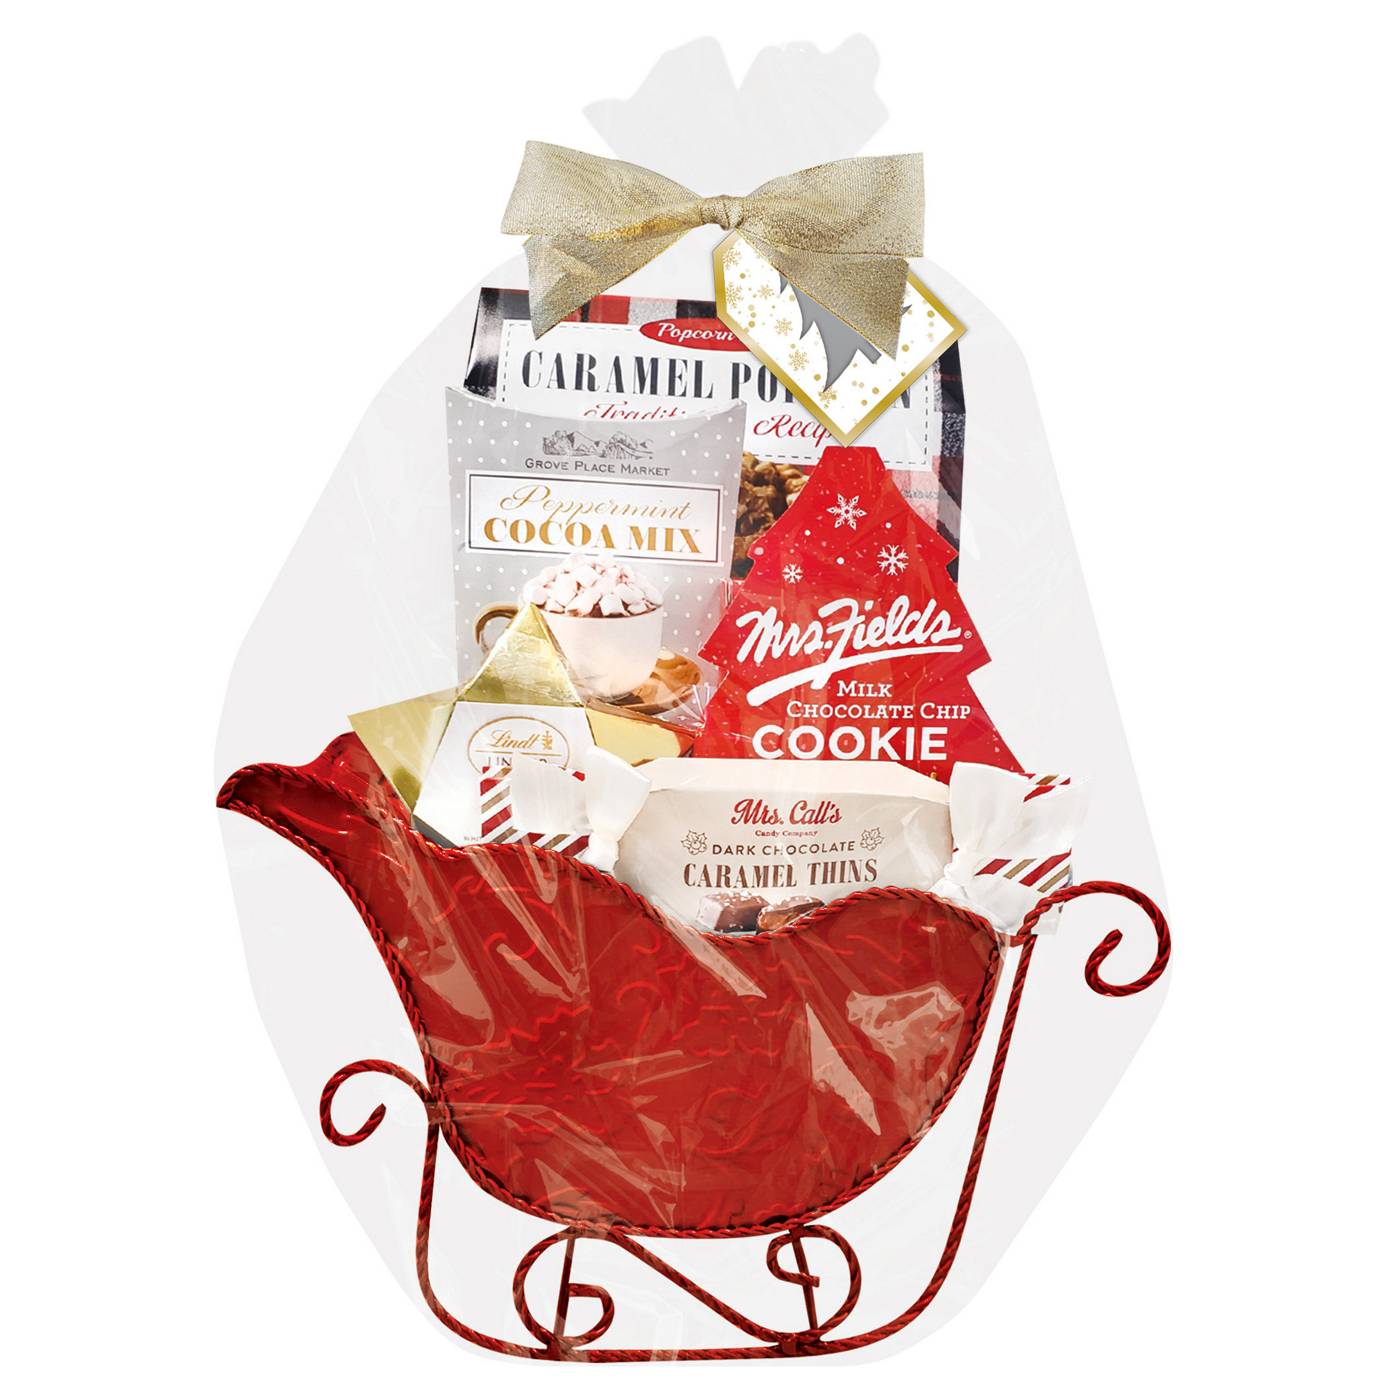 Holiday Gift Basket of Snacks, Chocolate & Cookies - Chips